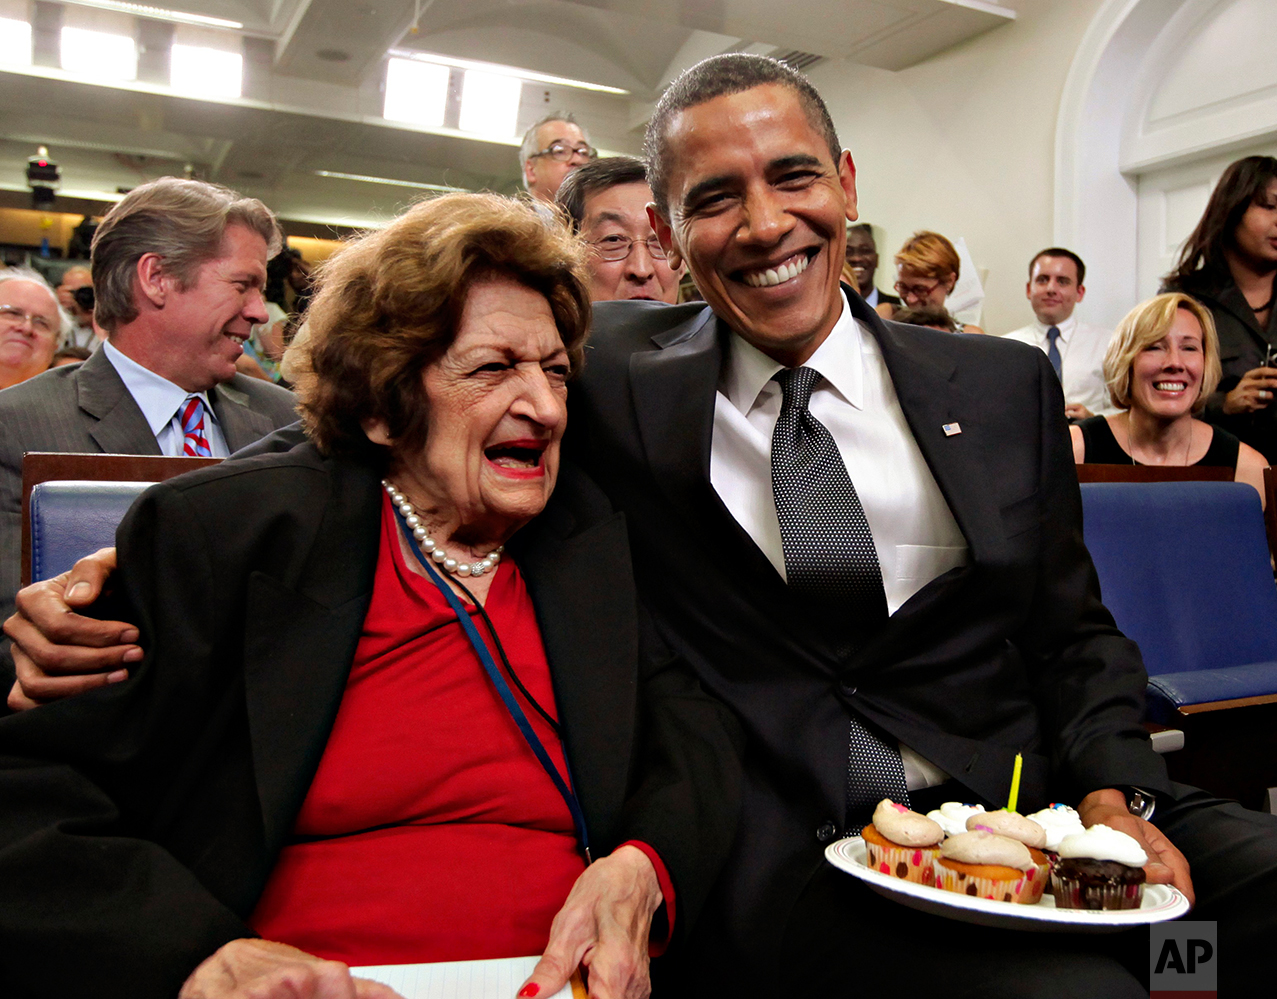  In this Aug. 4, 2009 photo, President Barack Obama, marking his 48th birthday, takes a break from his official duties to bring birthday greetings to veteran White House reporter Helen Thomas, left, who shares the same birthday and turns 89, in the W